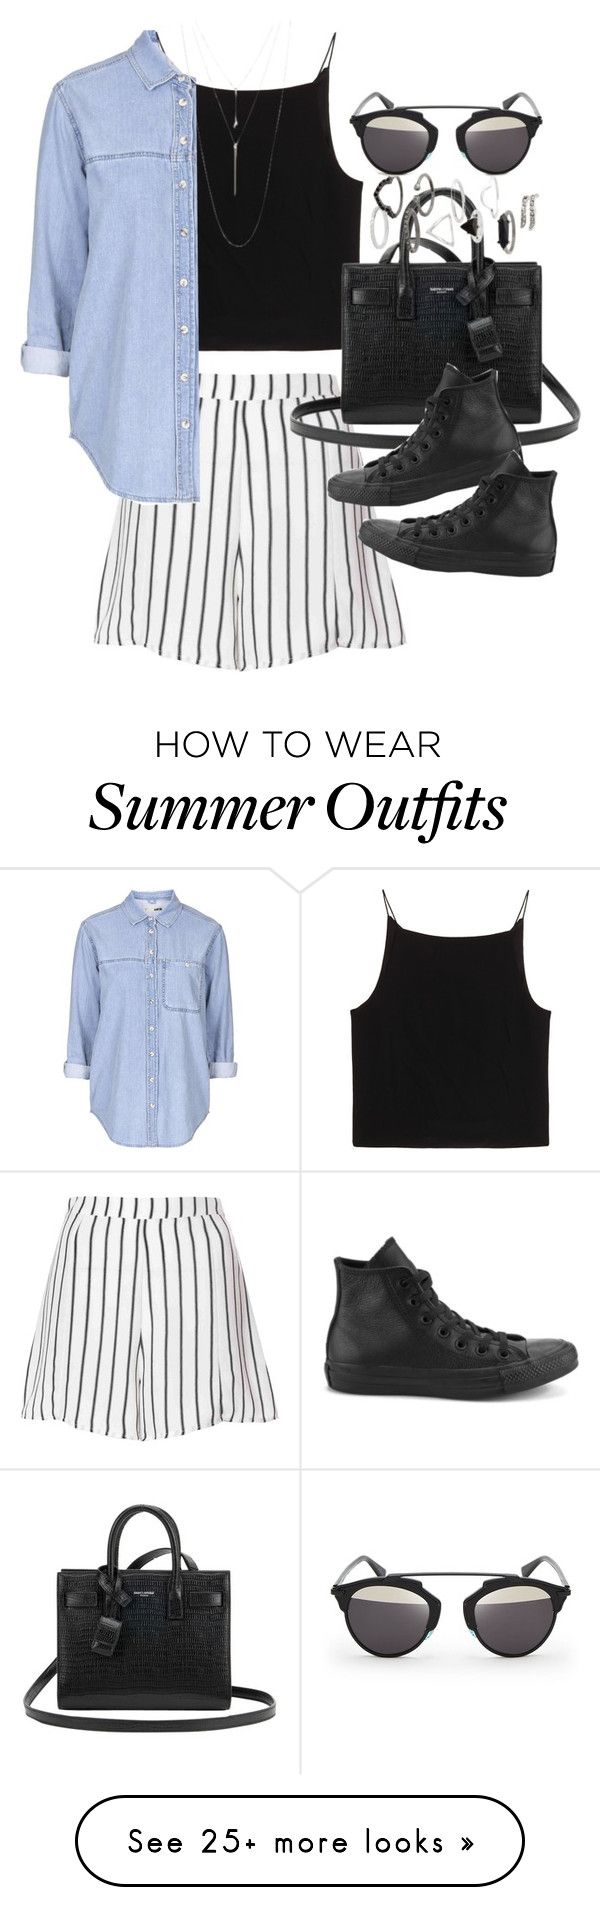 "Outfit for a summer festival" by ferned on Polyvore featuring Glamoro...